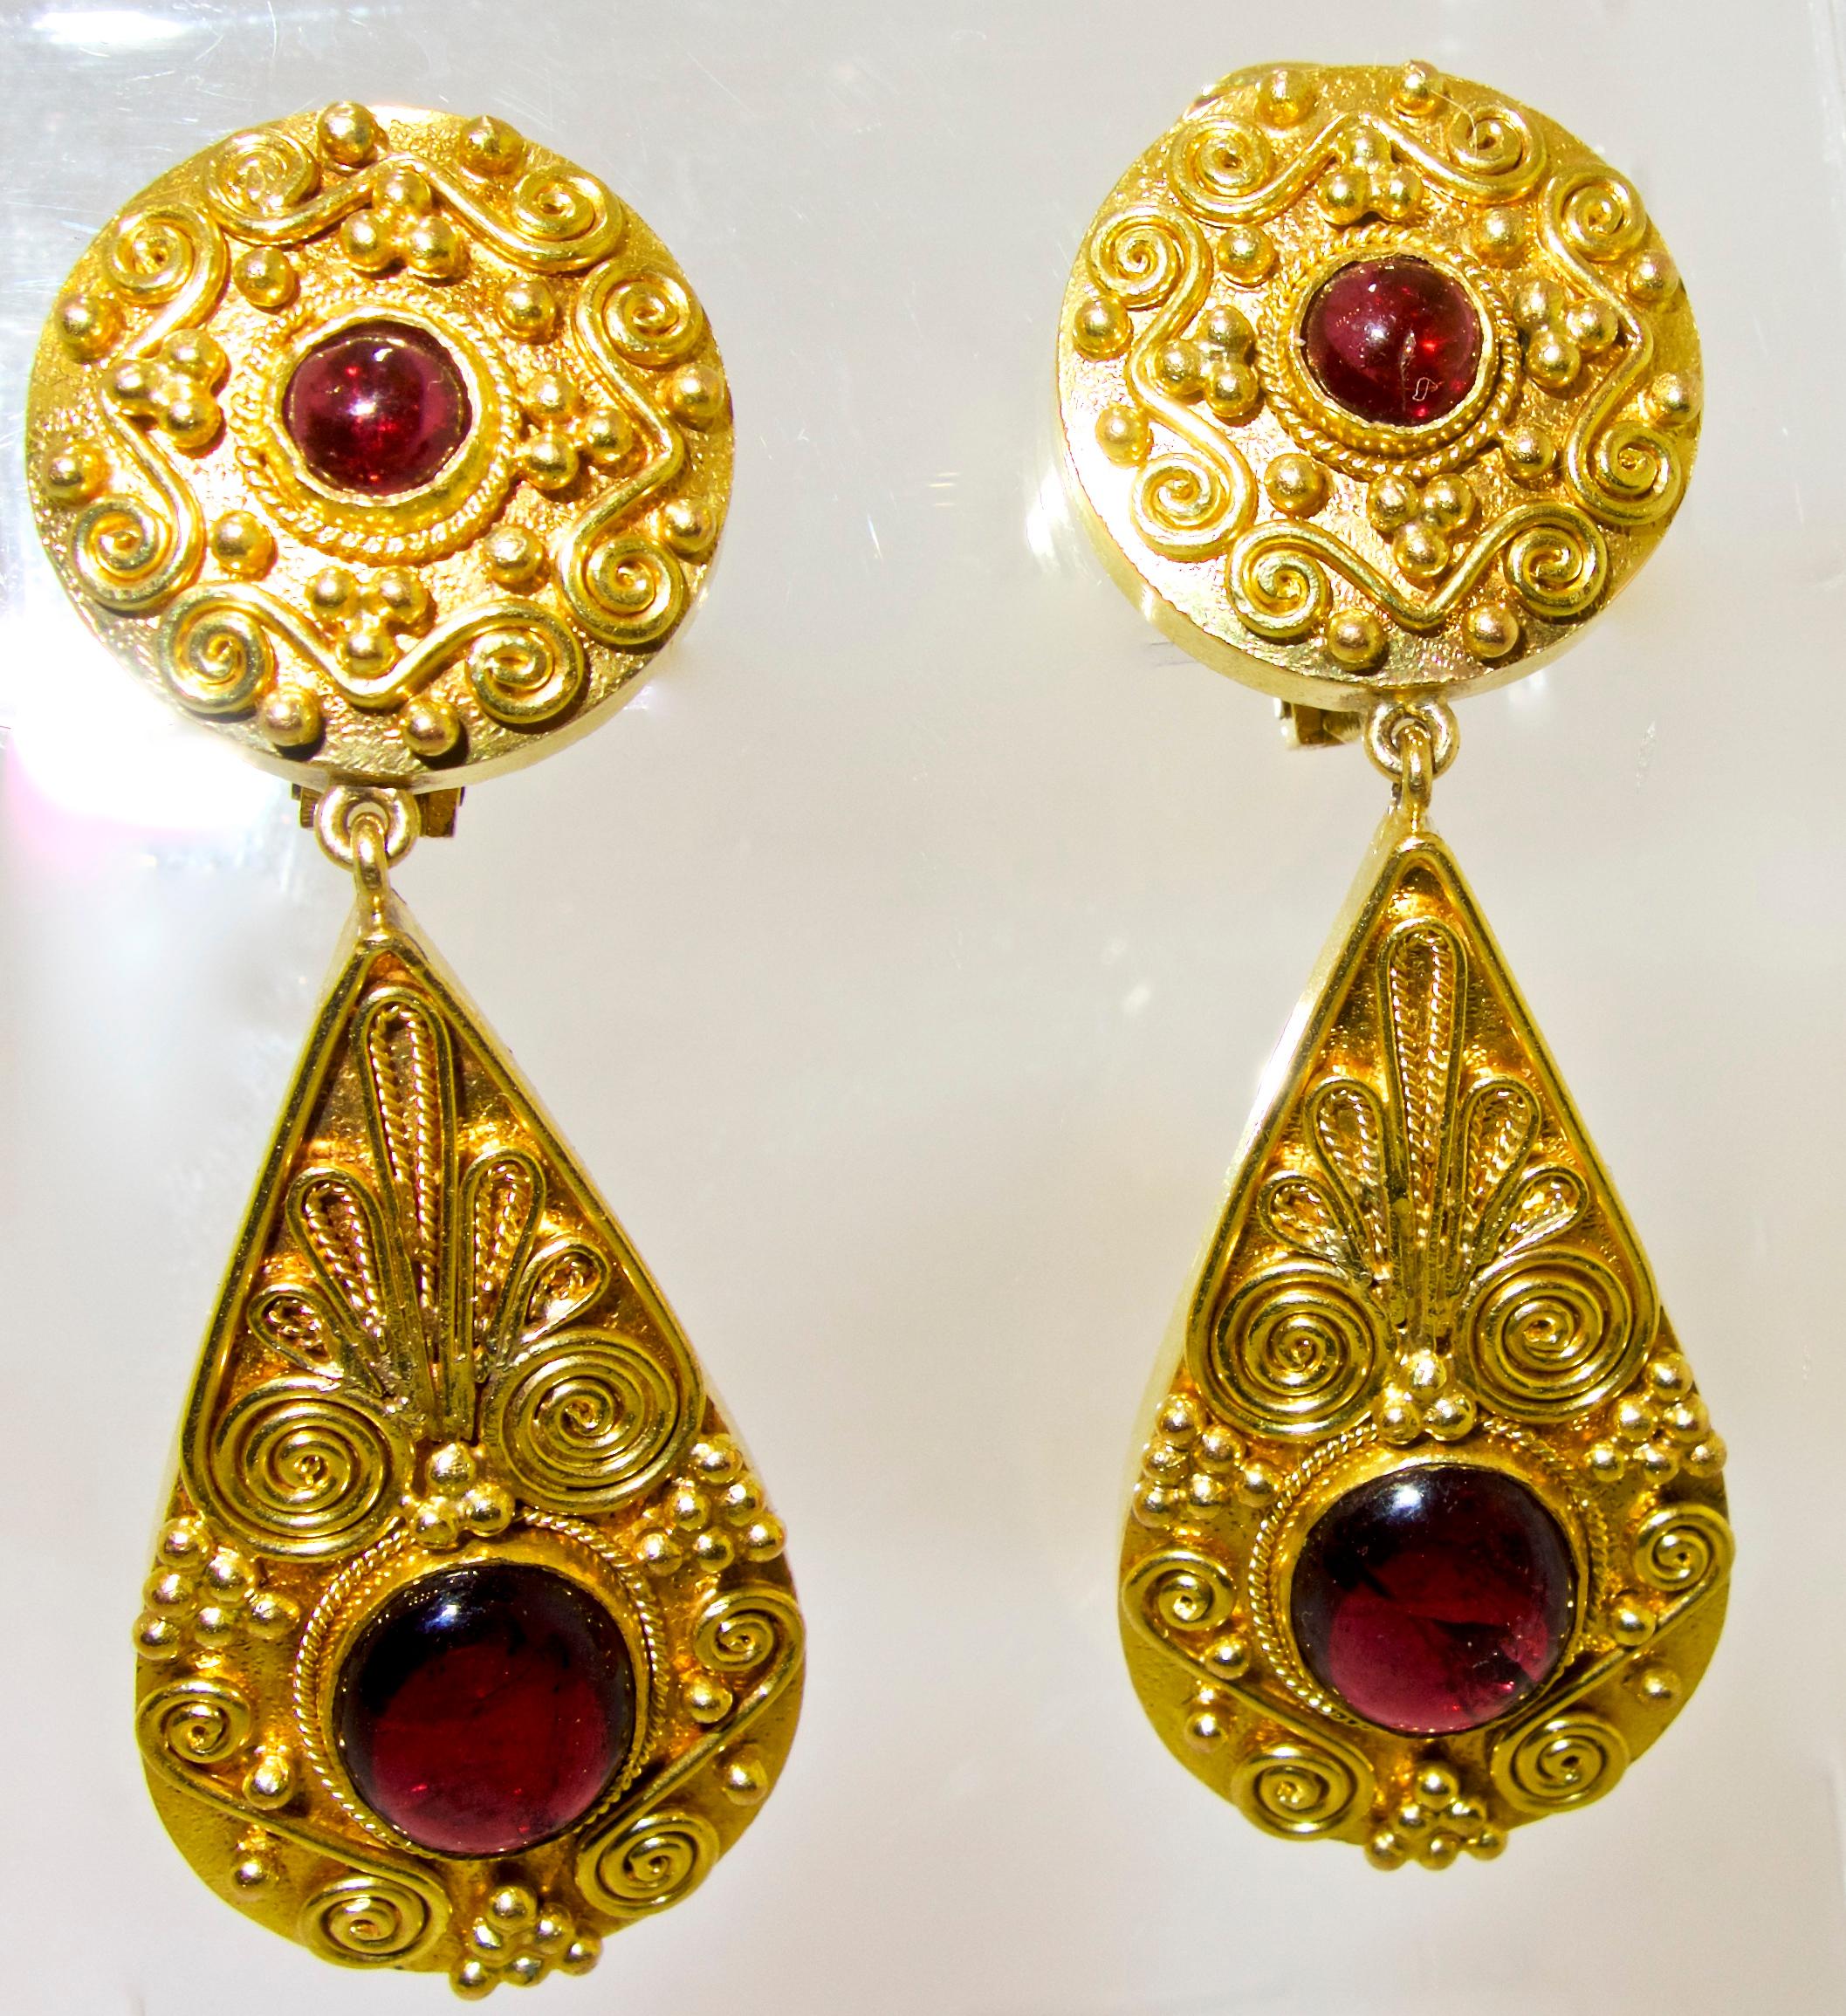 18K and 4 natural deep Burgundy garnet earrings which are highly decorated with bead and wire work, referred to as Etruscan Revival.  These earrings are easy to wear and now for a non pierced ear but can easily be converted to accommodate a pierced